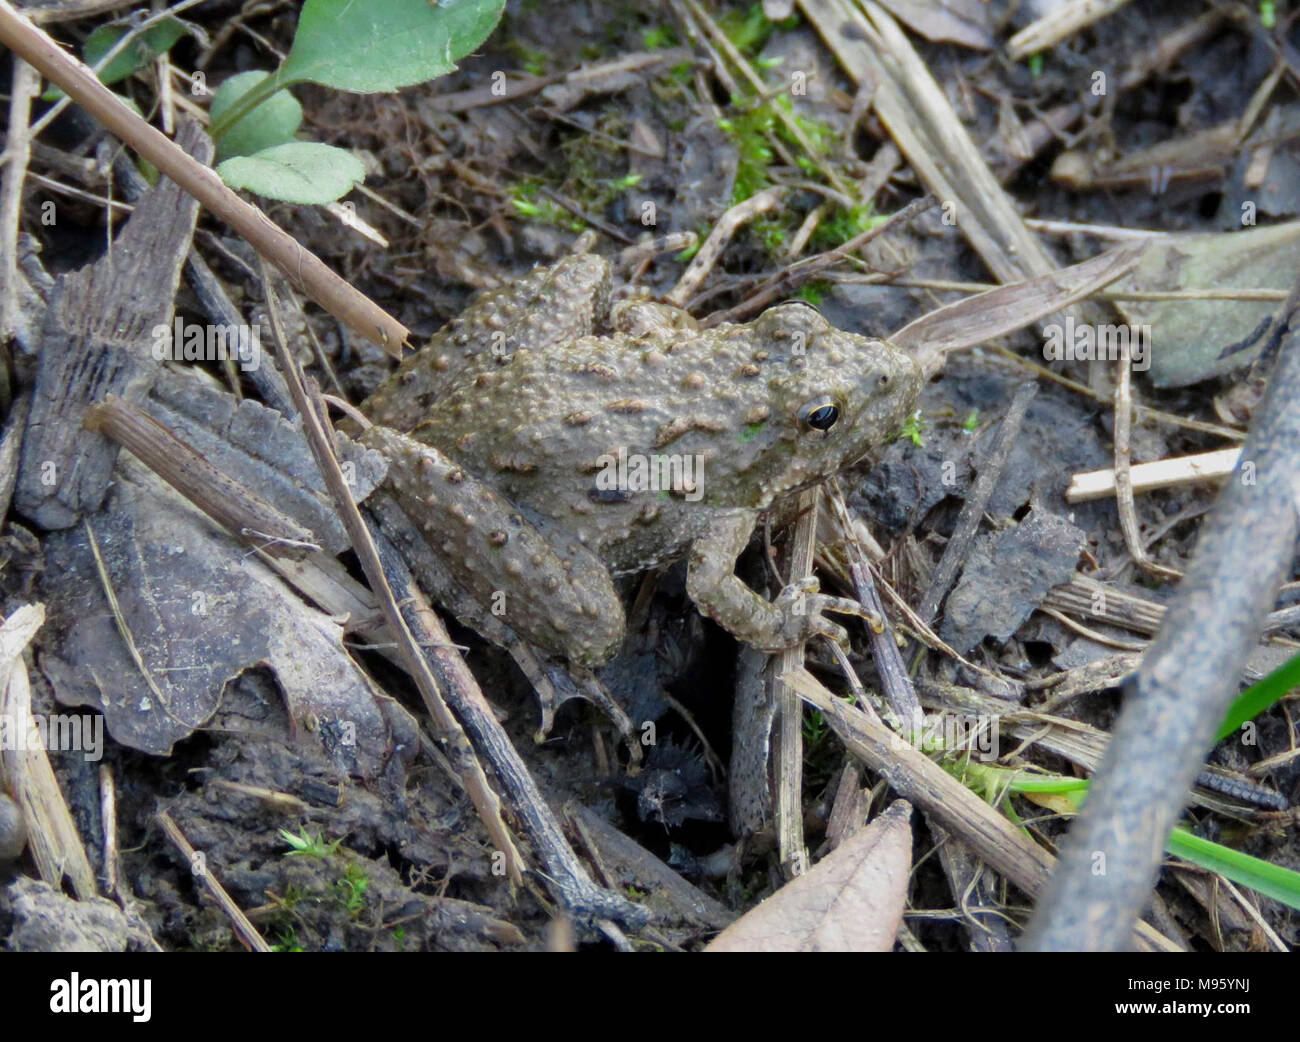 Cricket frog blending in with its surroundings Stock Photo